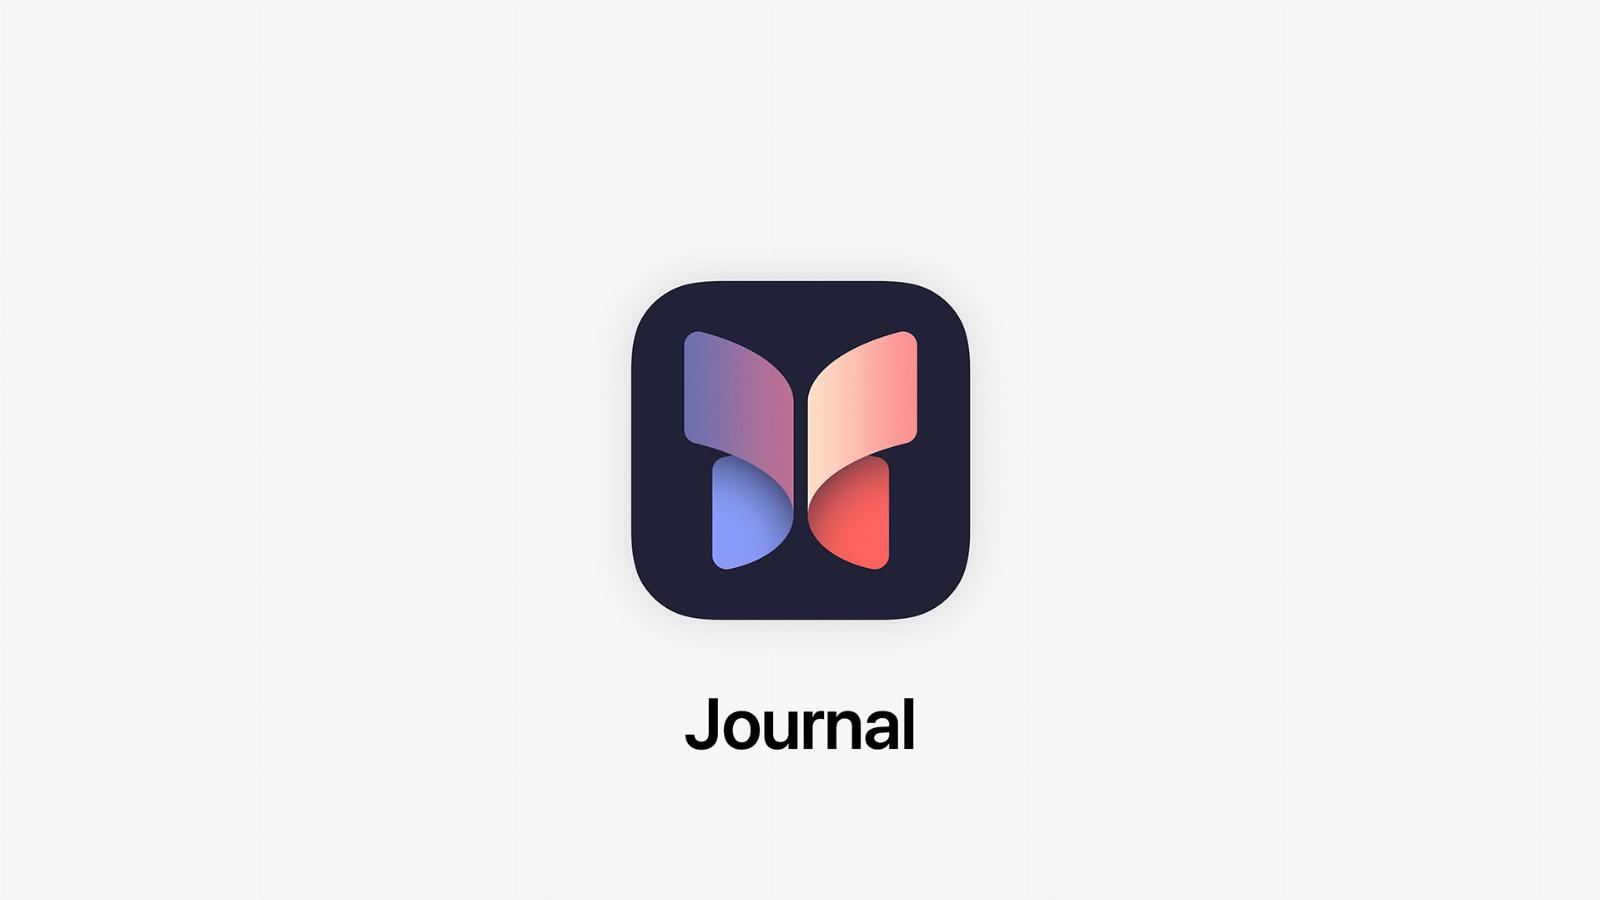 Apple introduces a dedicated ‘Journal’ app to log your daily experiences